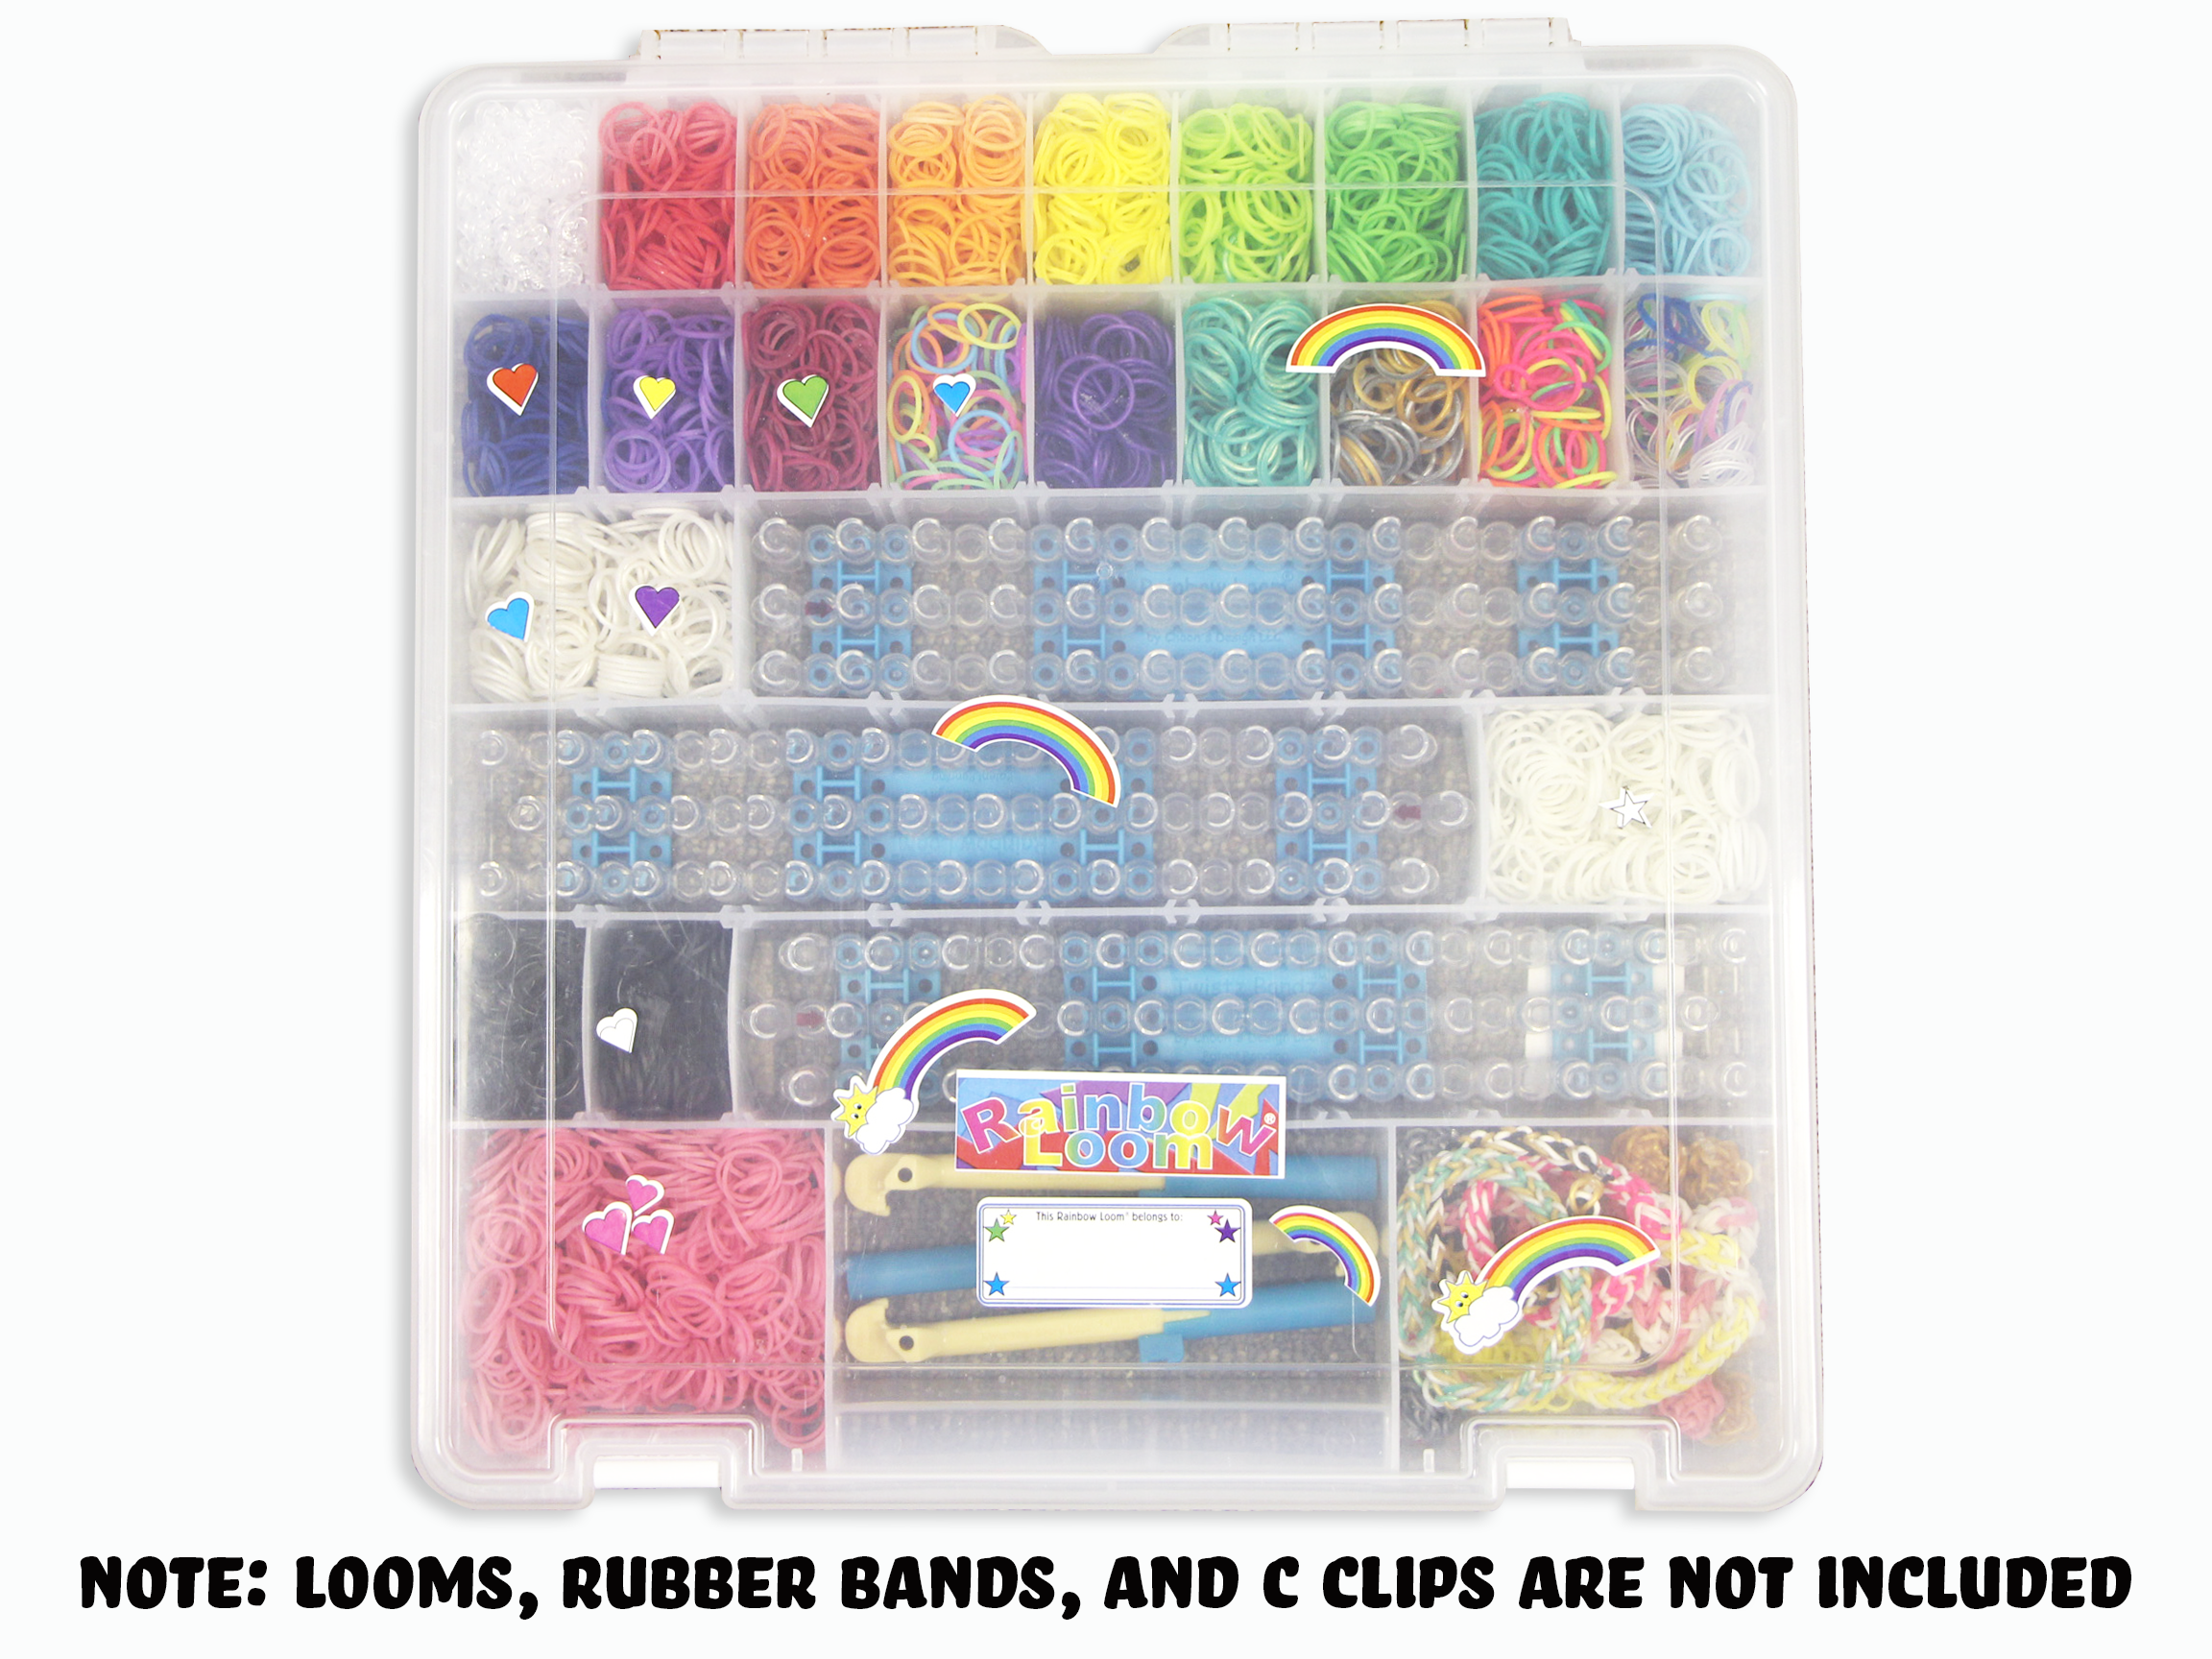 Rainbow loom storage case sold at michaels